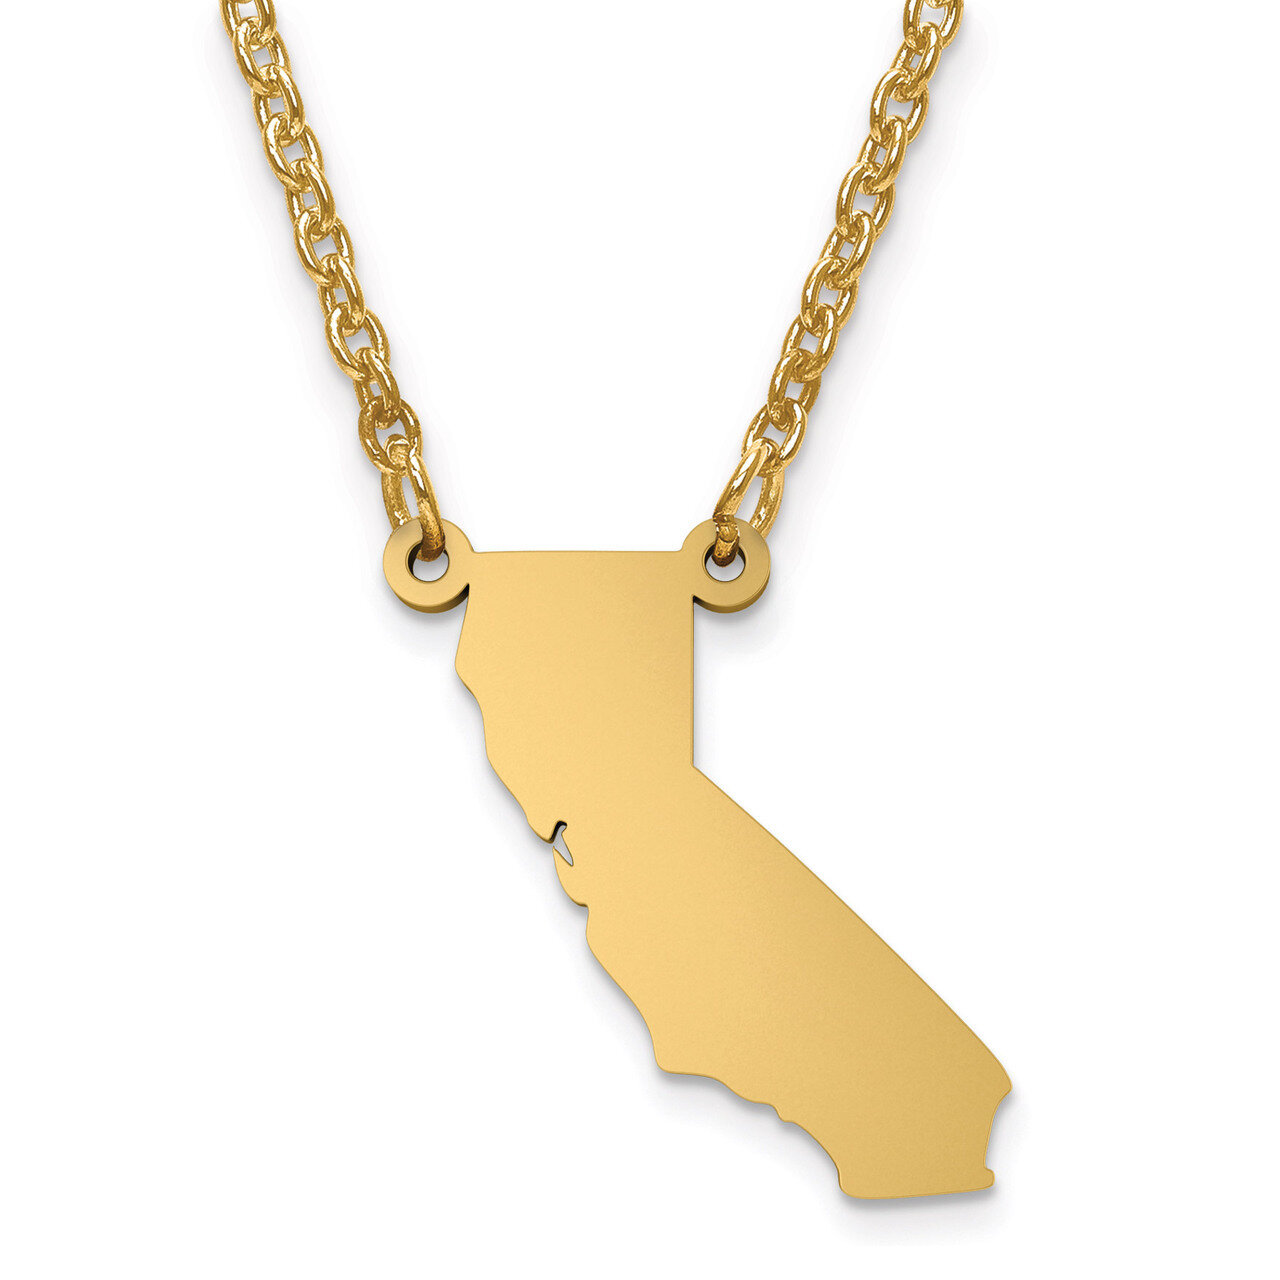 California State Pendant with Chain Engravable Gold-plated on Sterling Silver